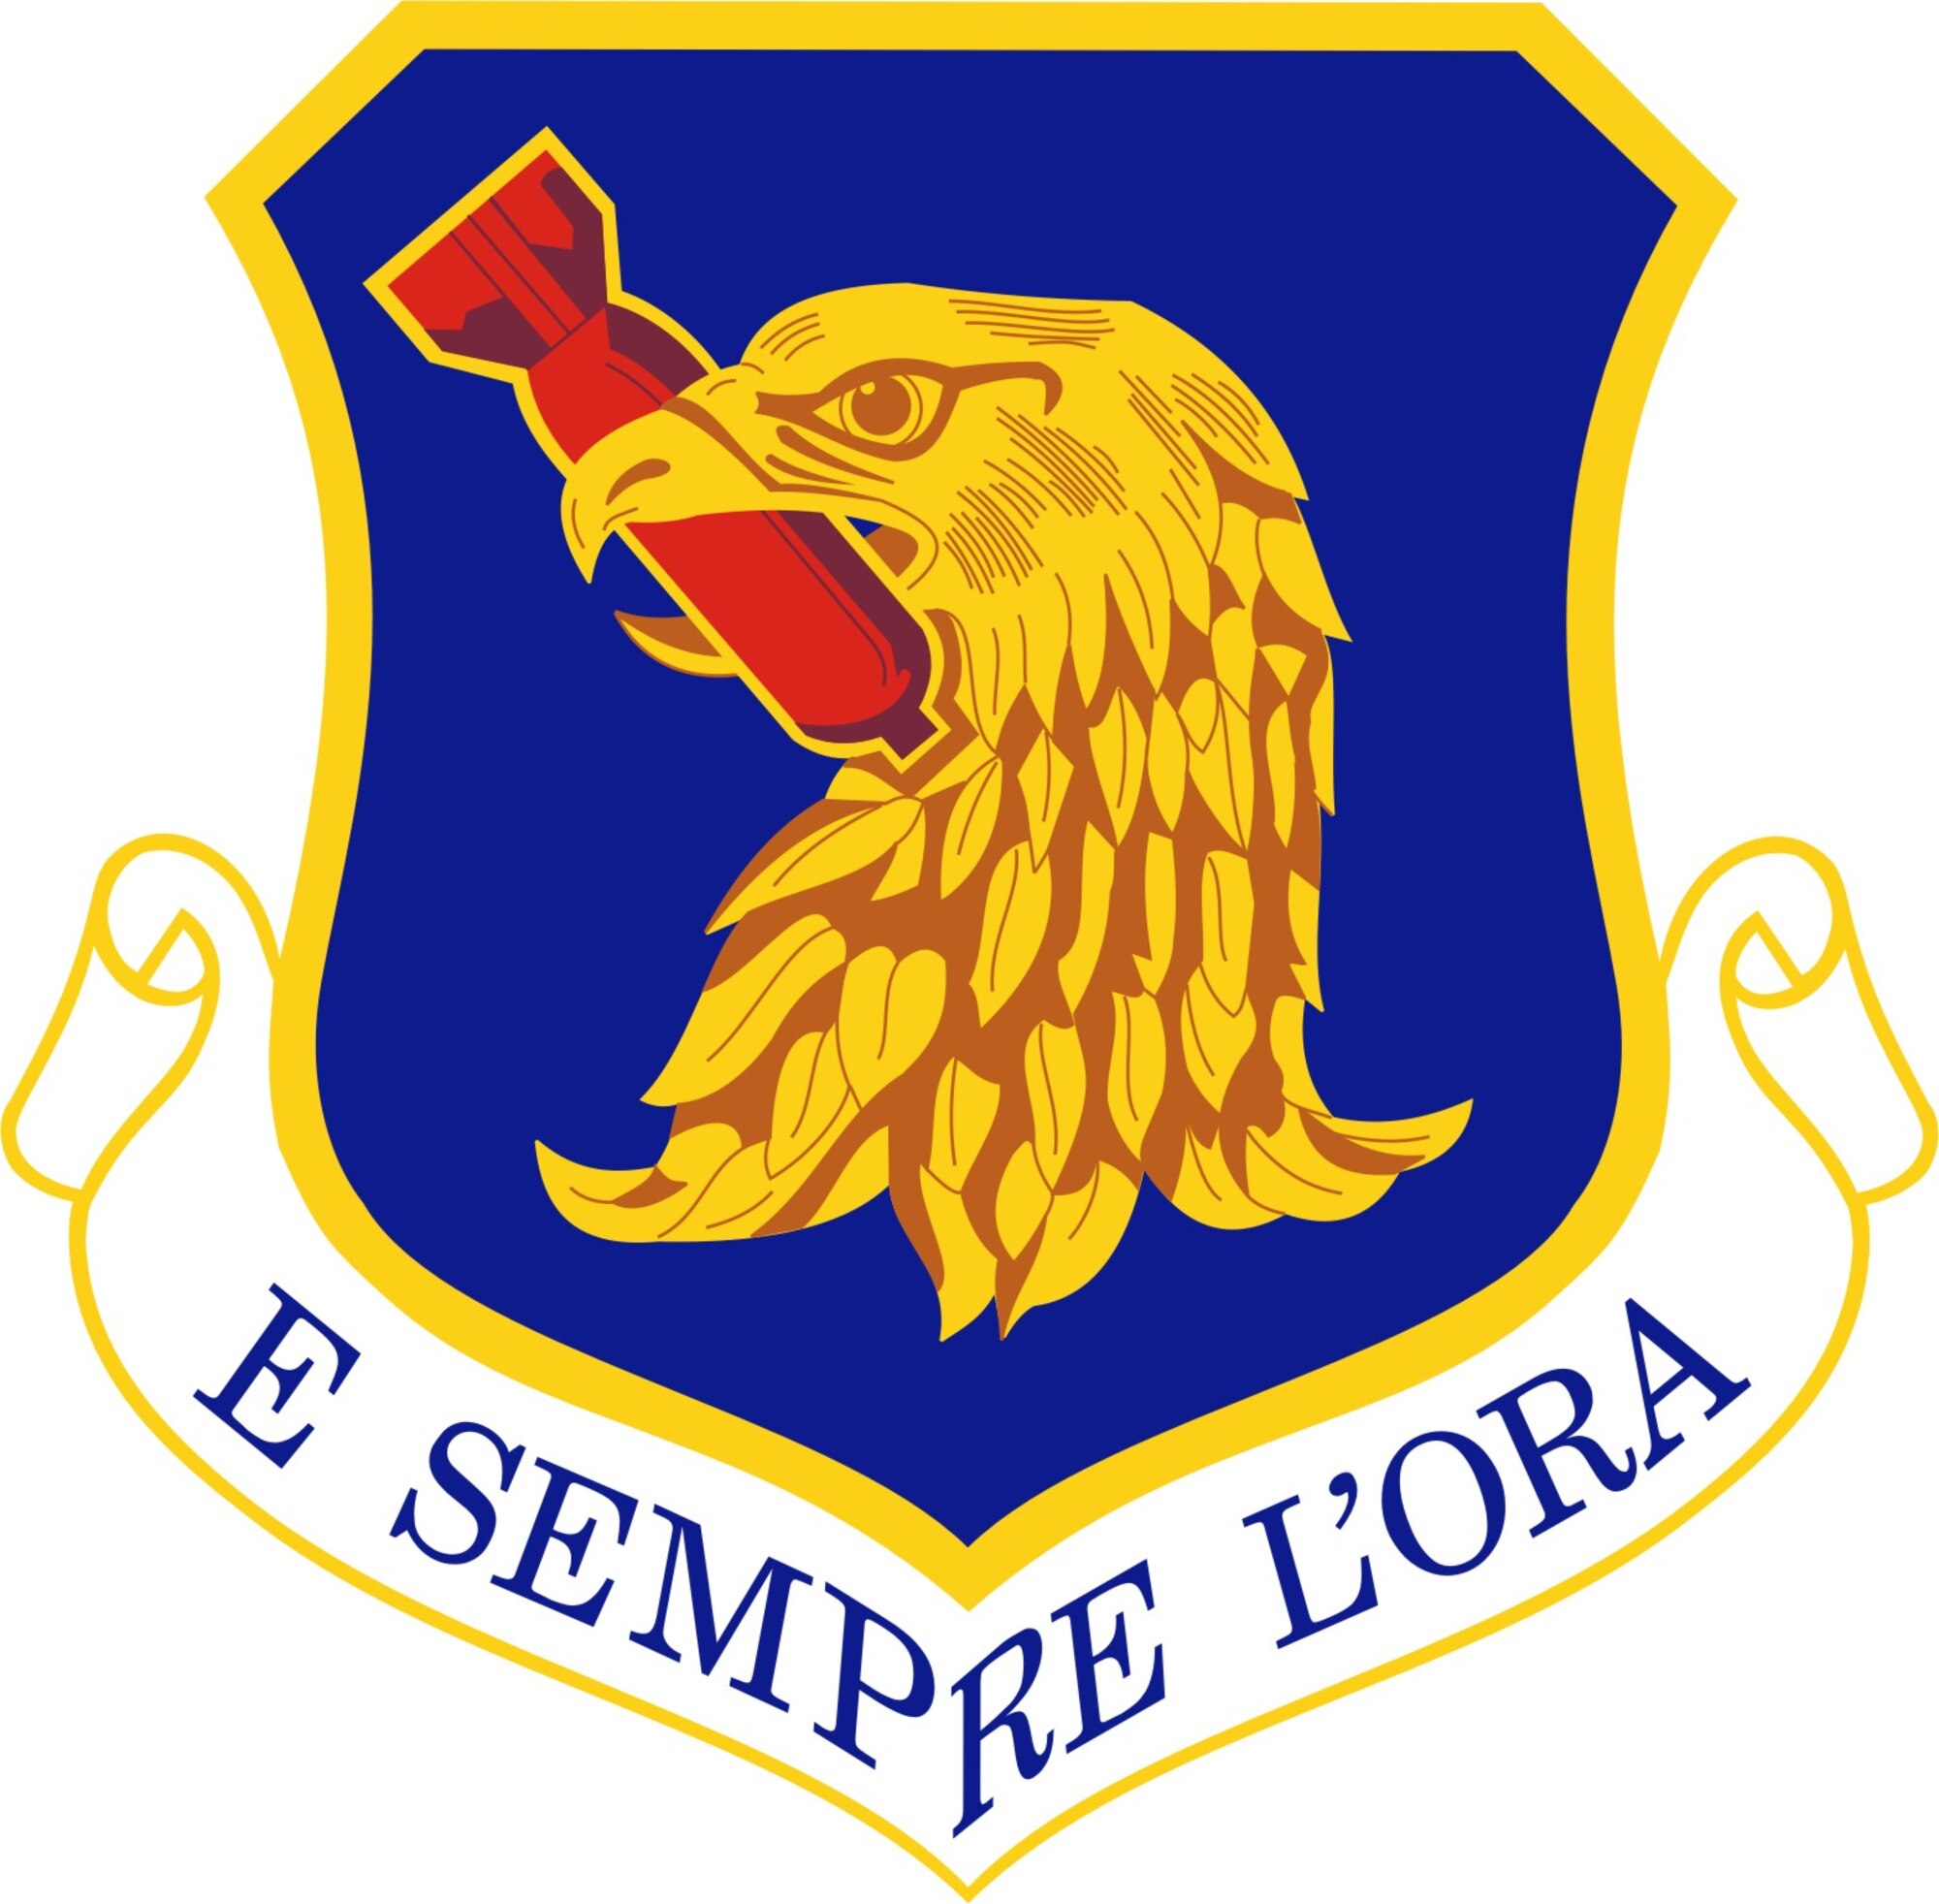 The 96th Test Wing is scheduled to conduct an active assailant exercise Jan. 7 from 9 a.m. to 11 a.m.
The annual training exercise will take place at Eglin Elementary School and is intended to test emergency response plans.